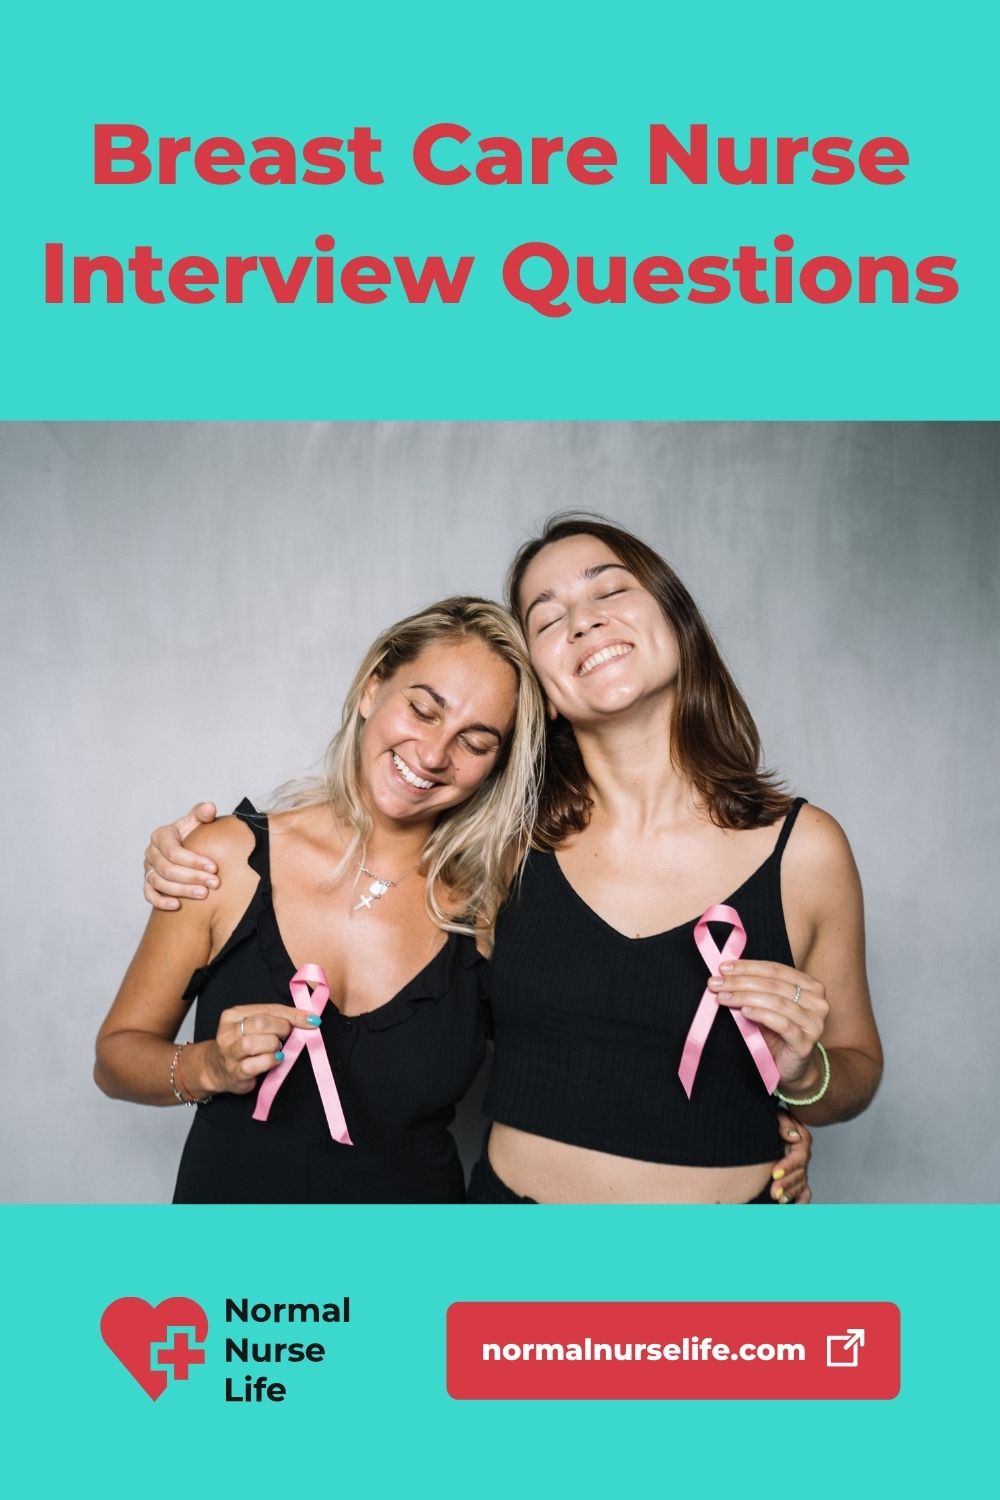 Breast care nurse interview questions